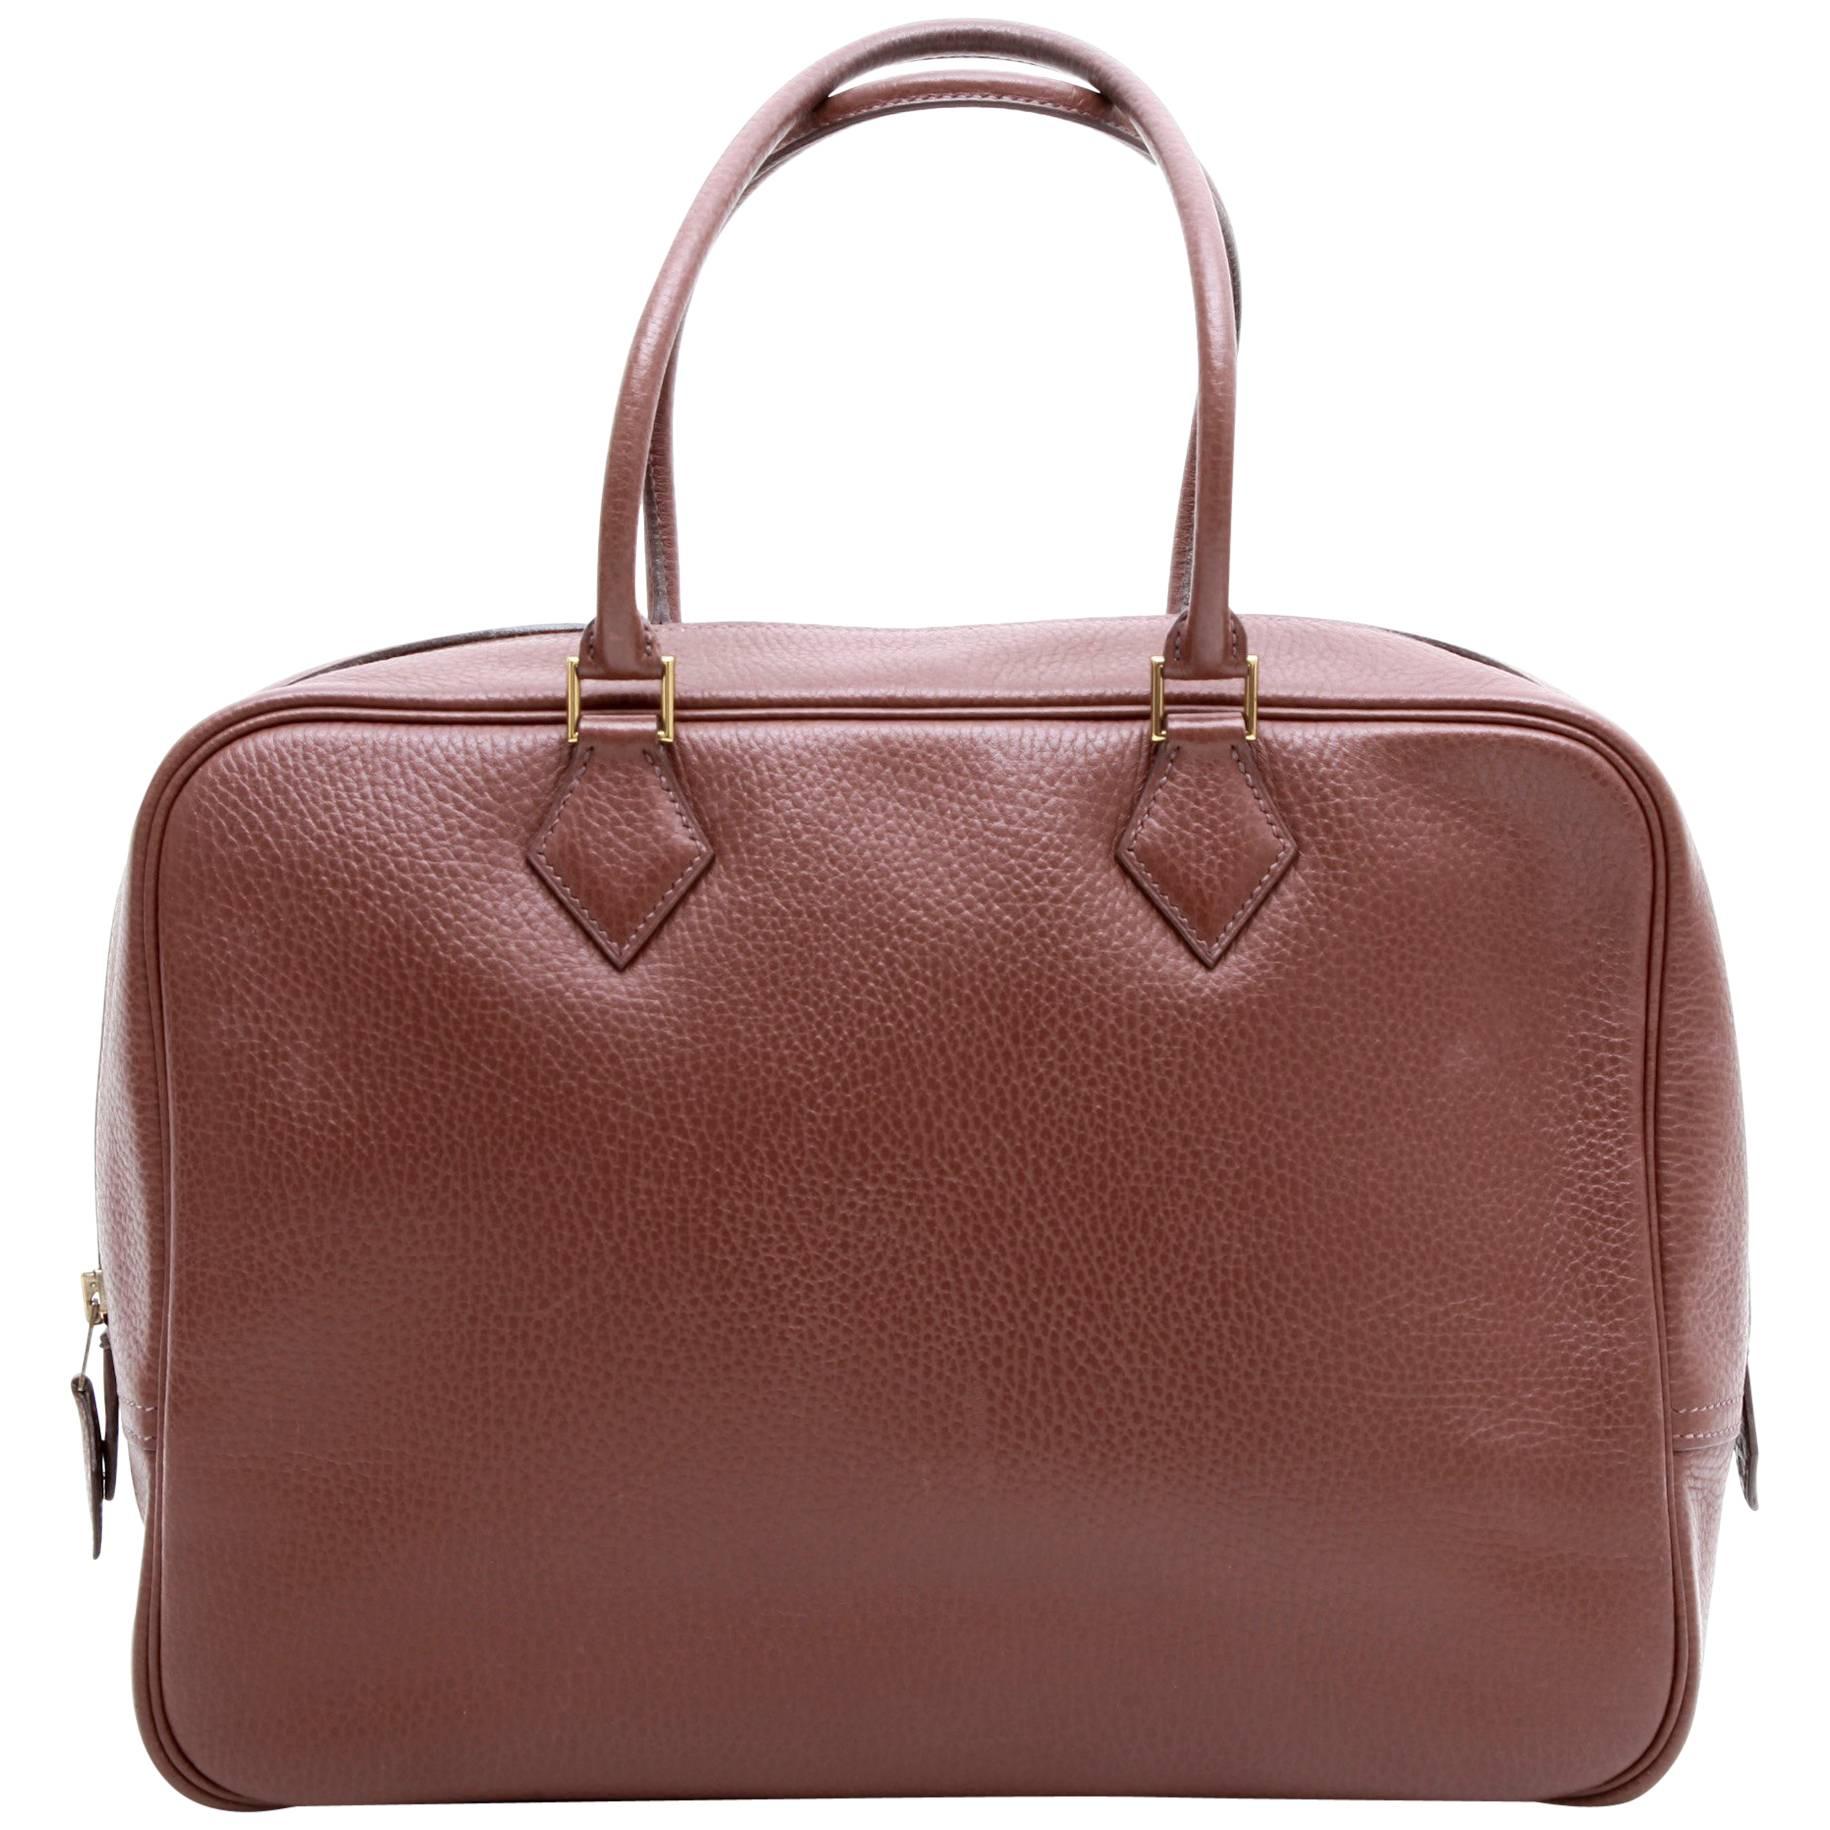 HERMES 'plume' Bag in Brown Grained Leather